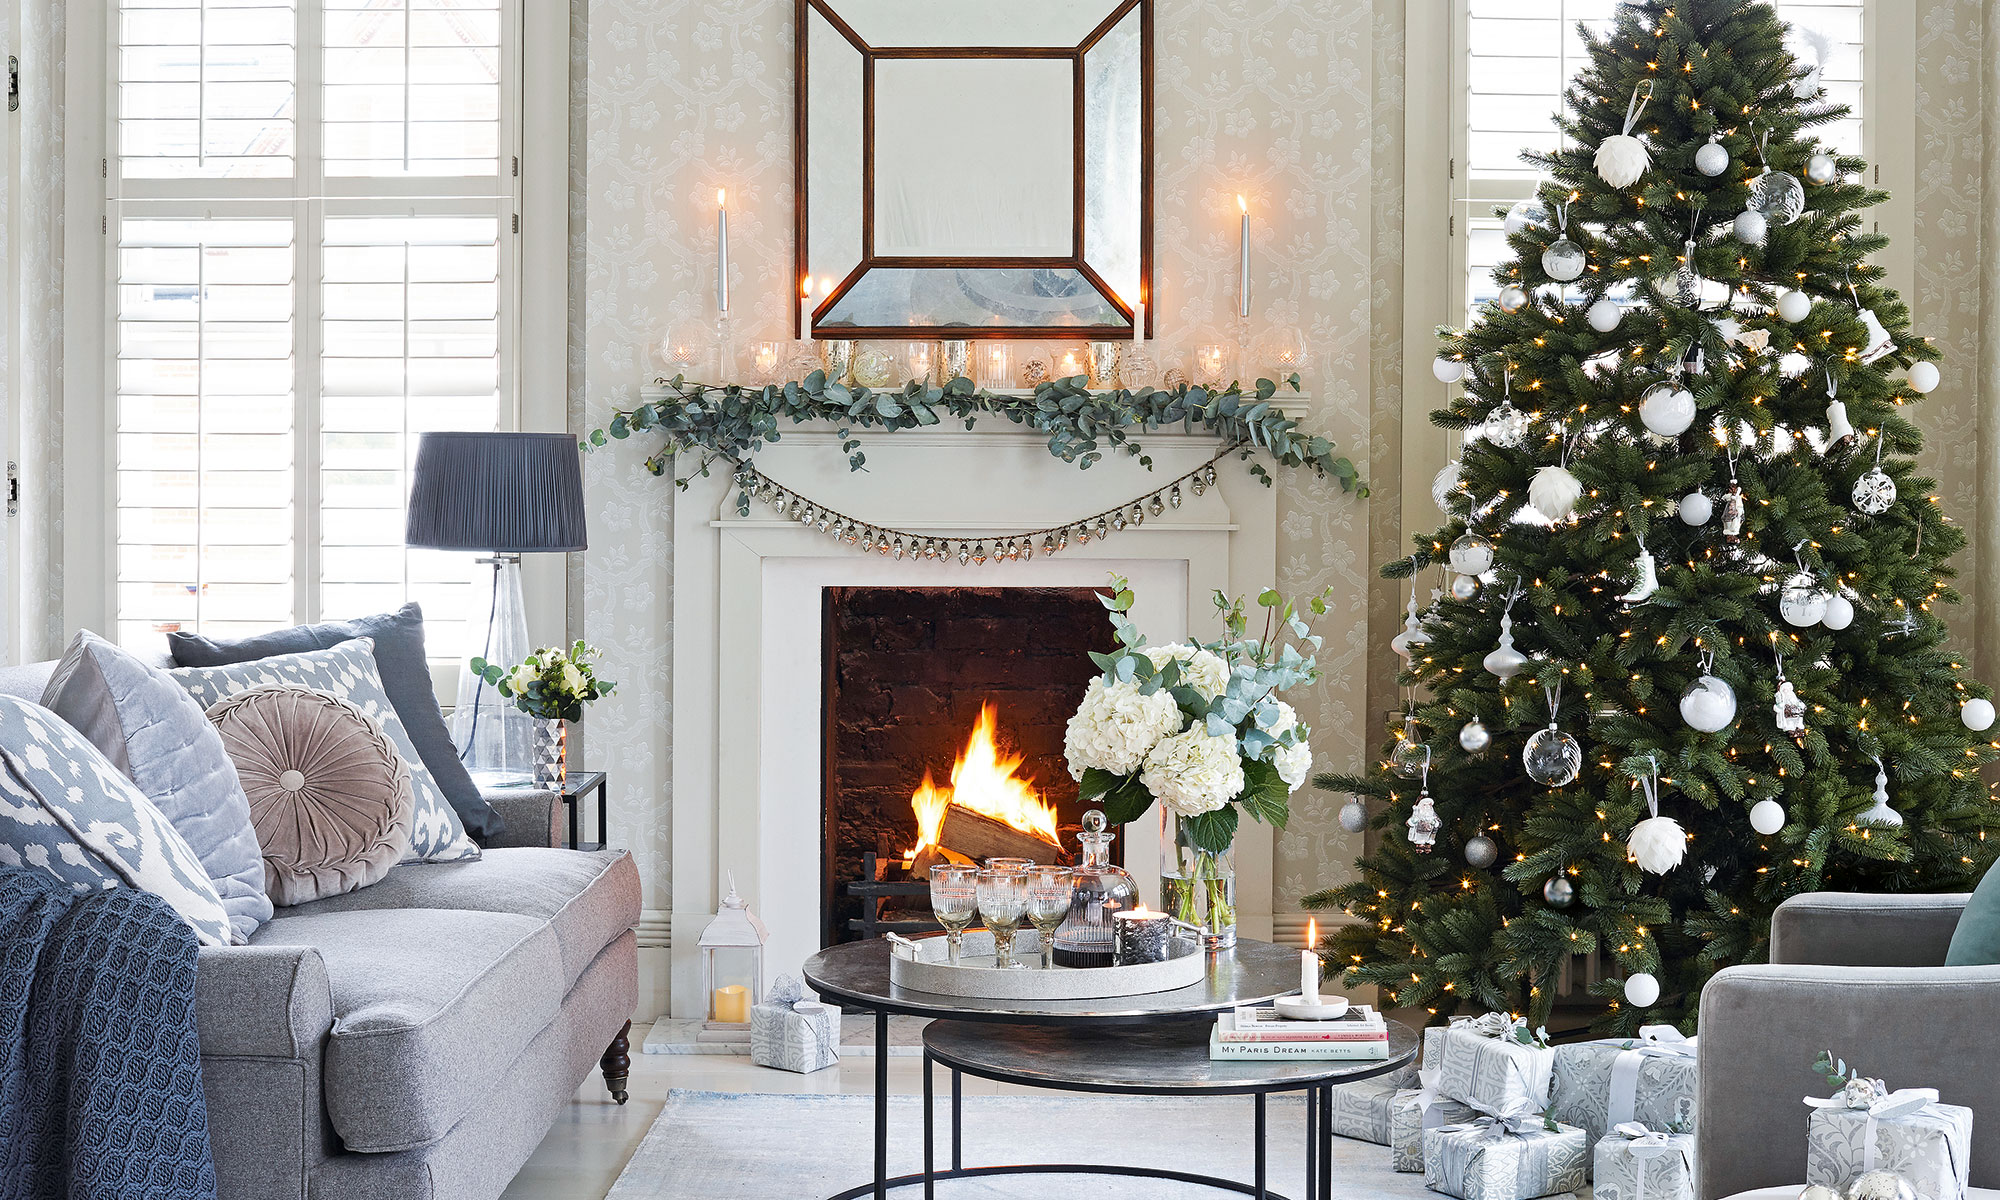 7 Christmas Tree Design Ideas | How To Decorate ...